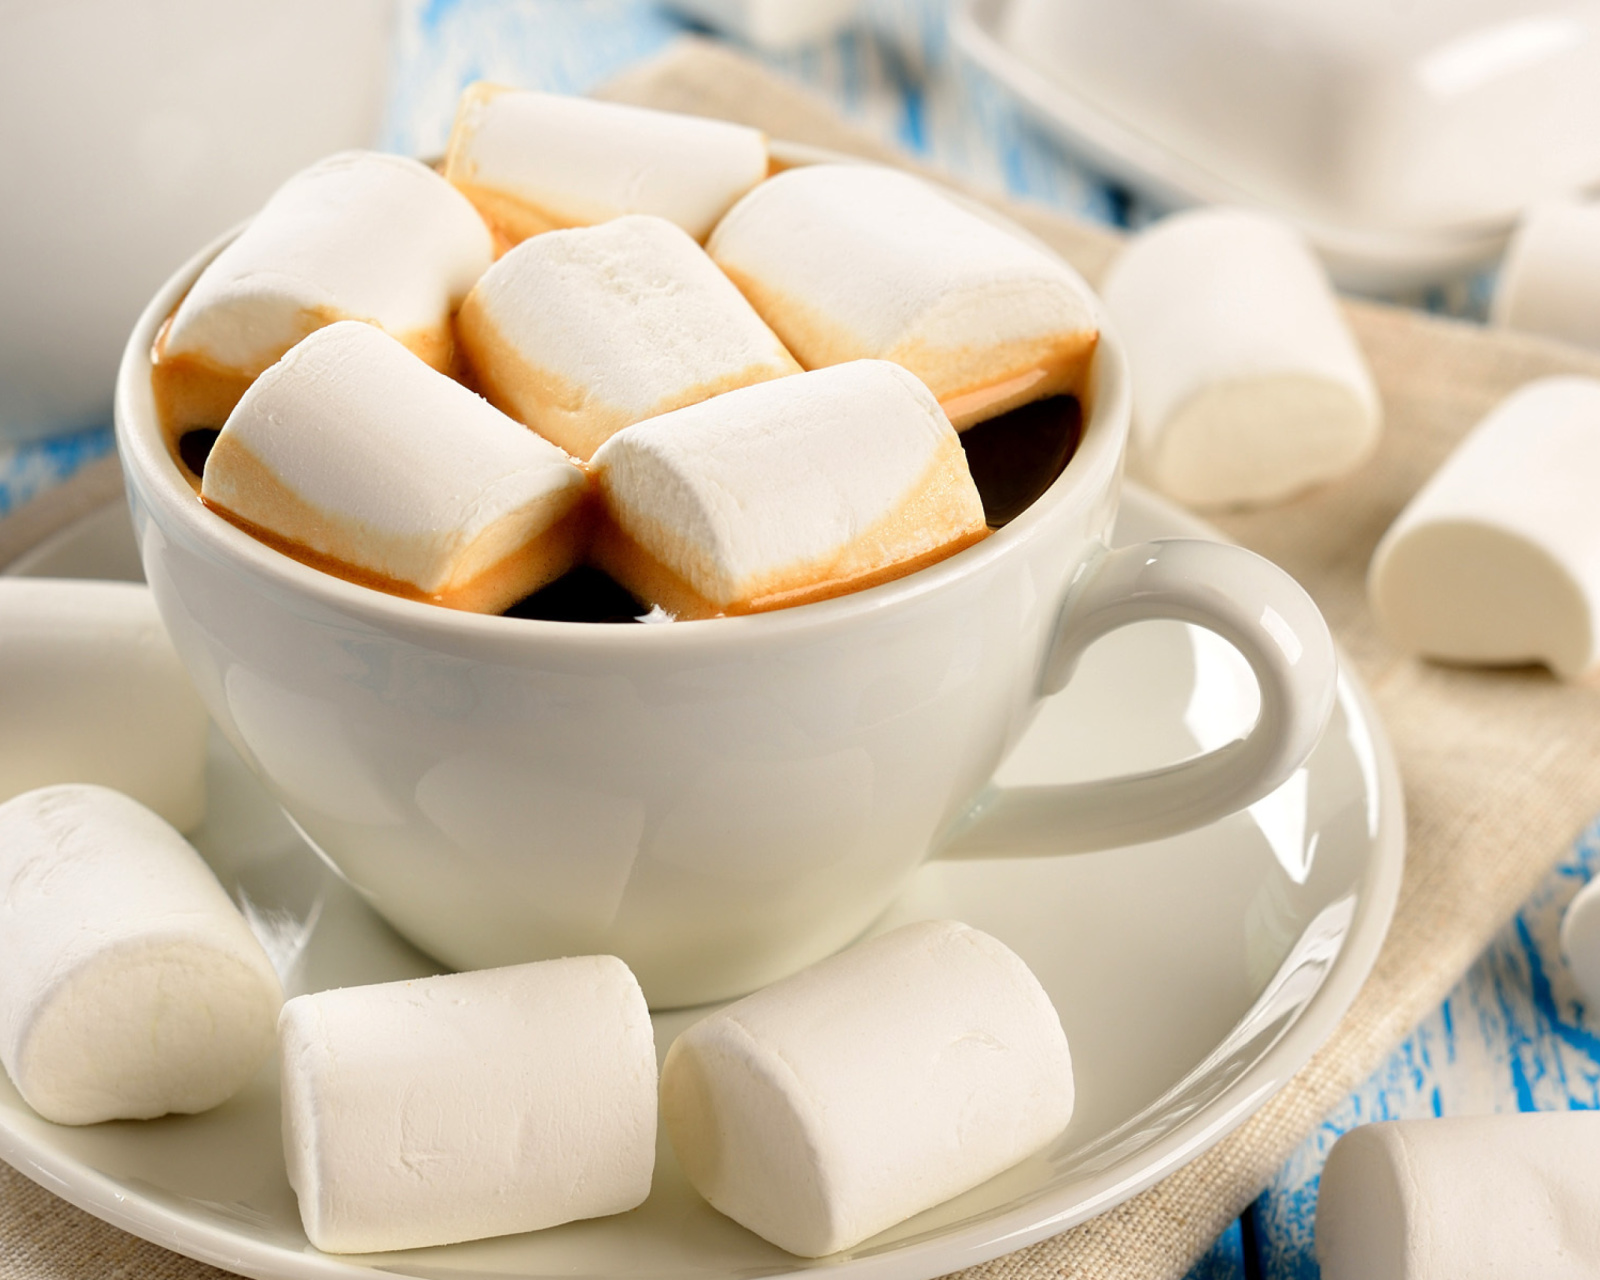 Marshmallow and Coffee wallpaper 1600x1280